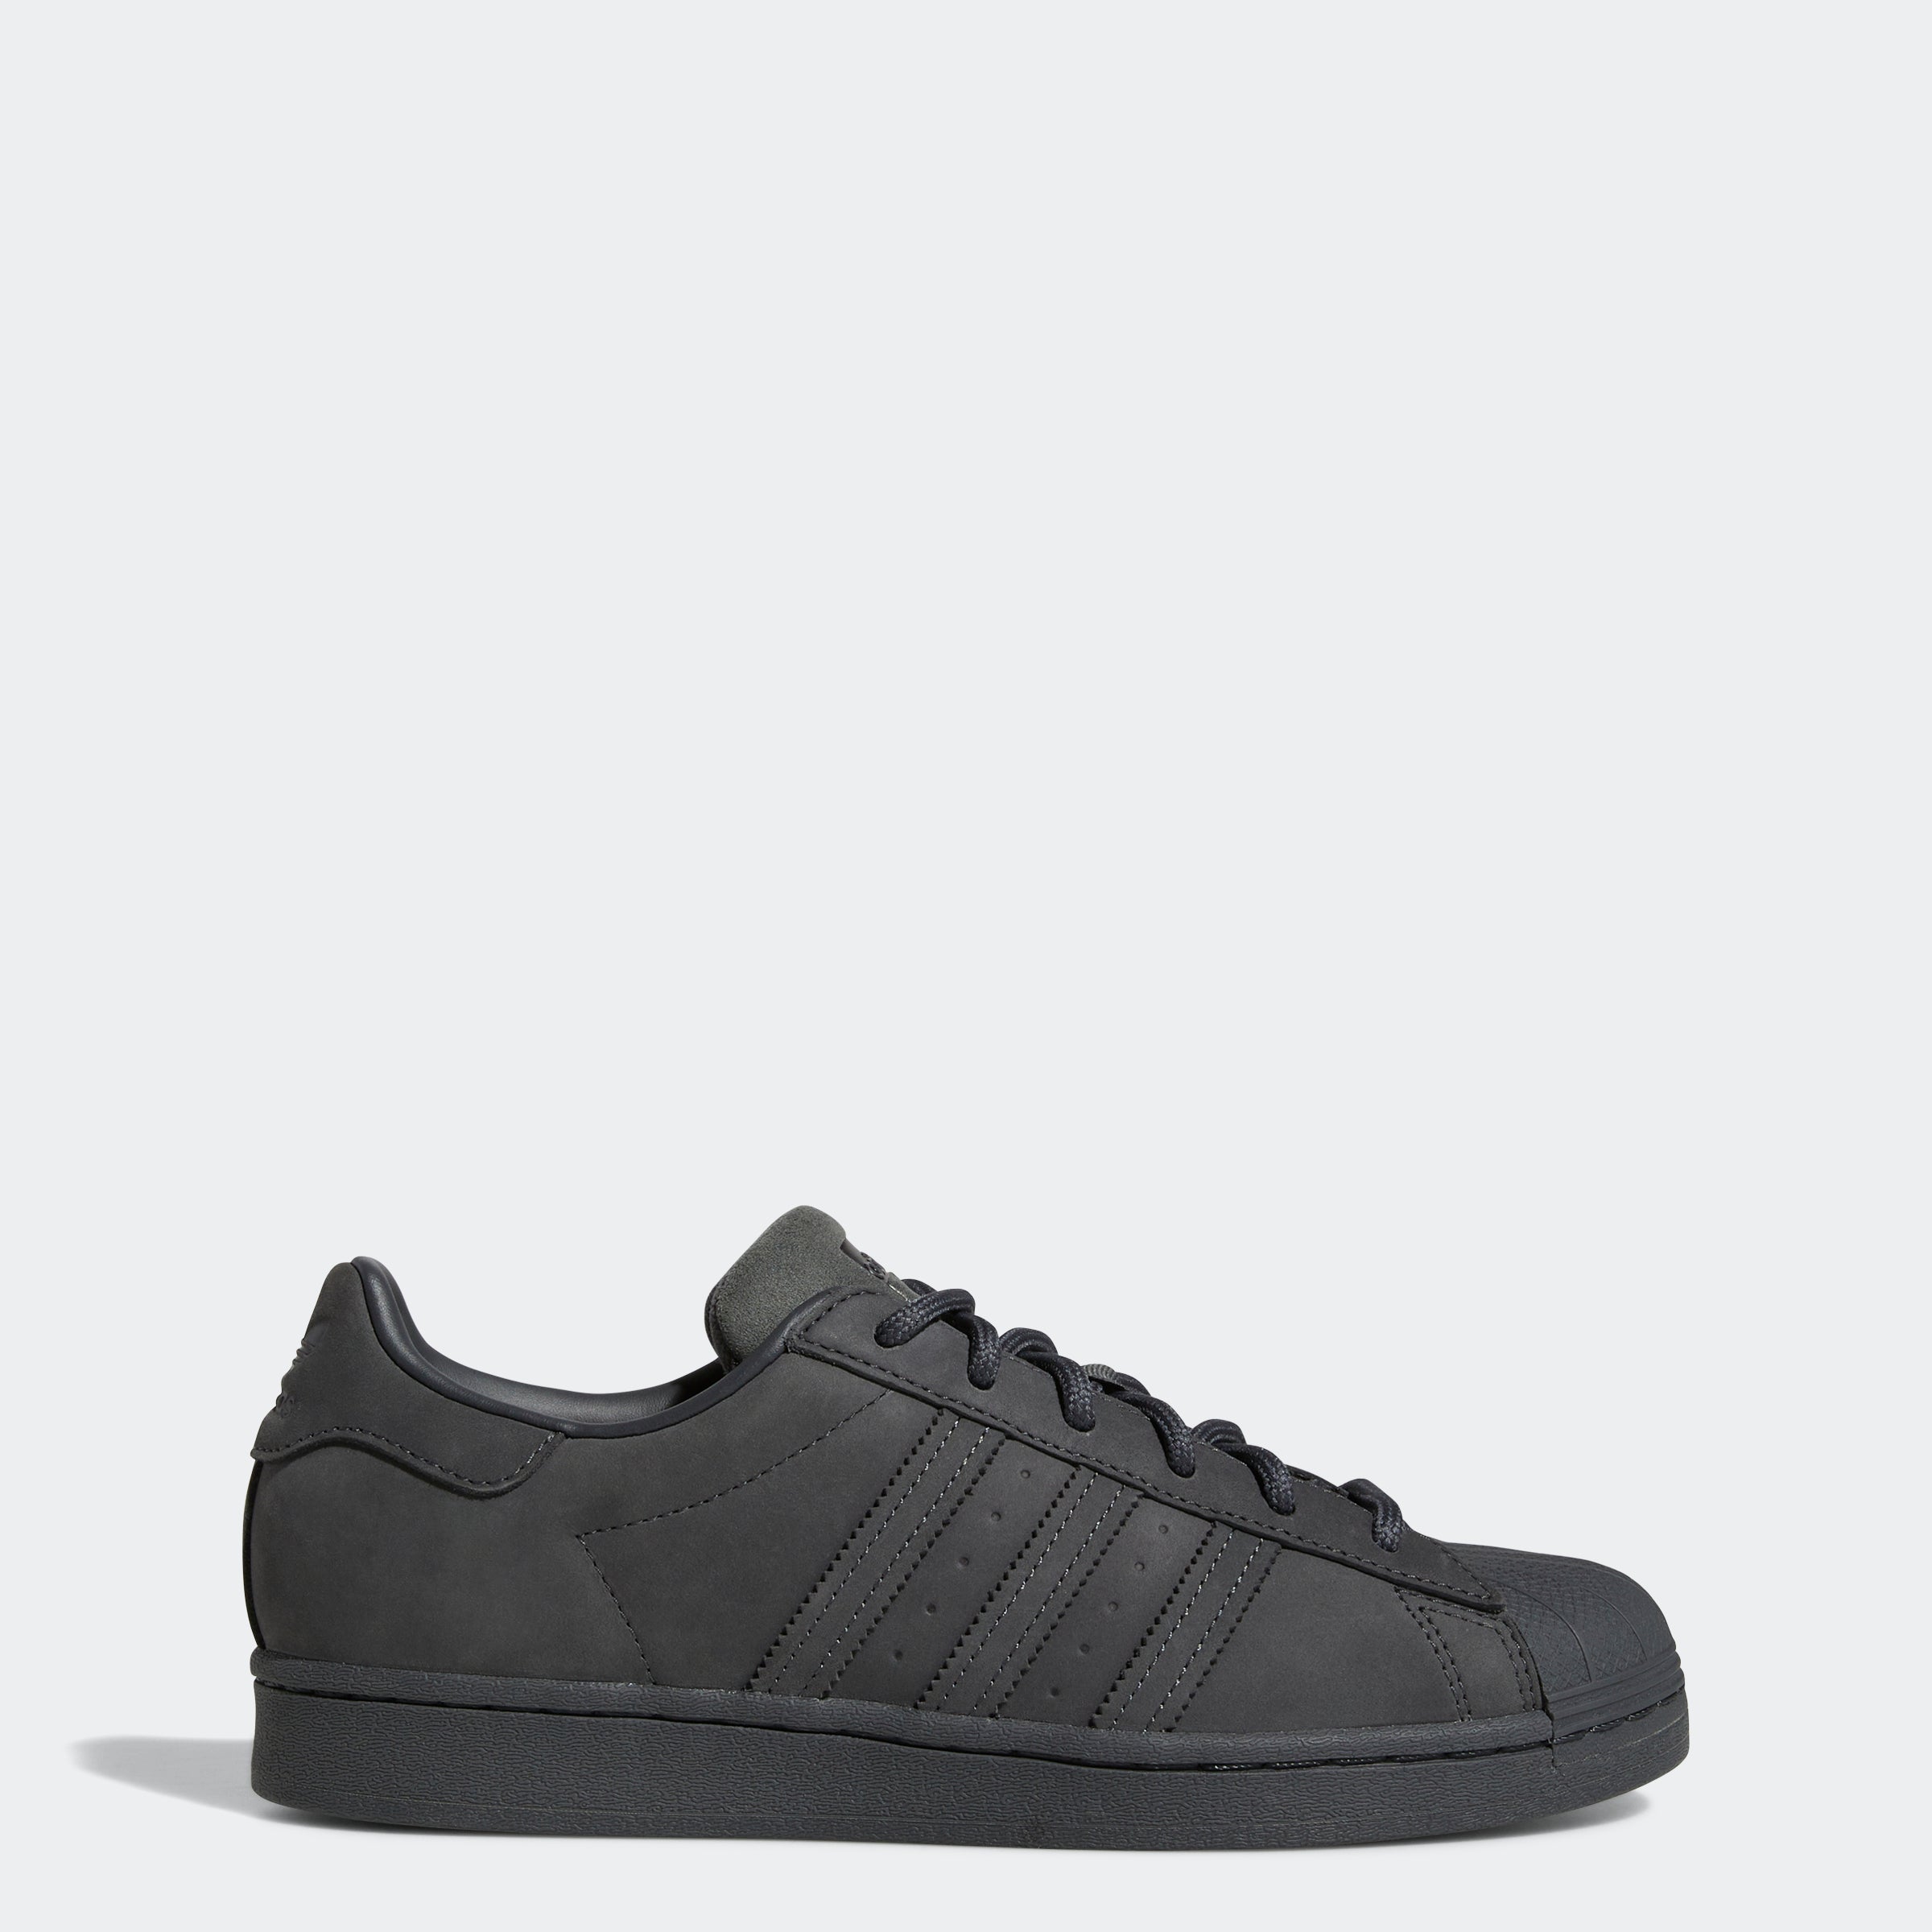 Men's adidas Shoes Grey GZ4830 | Chicago City Sports